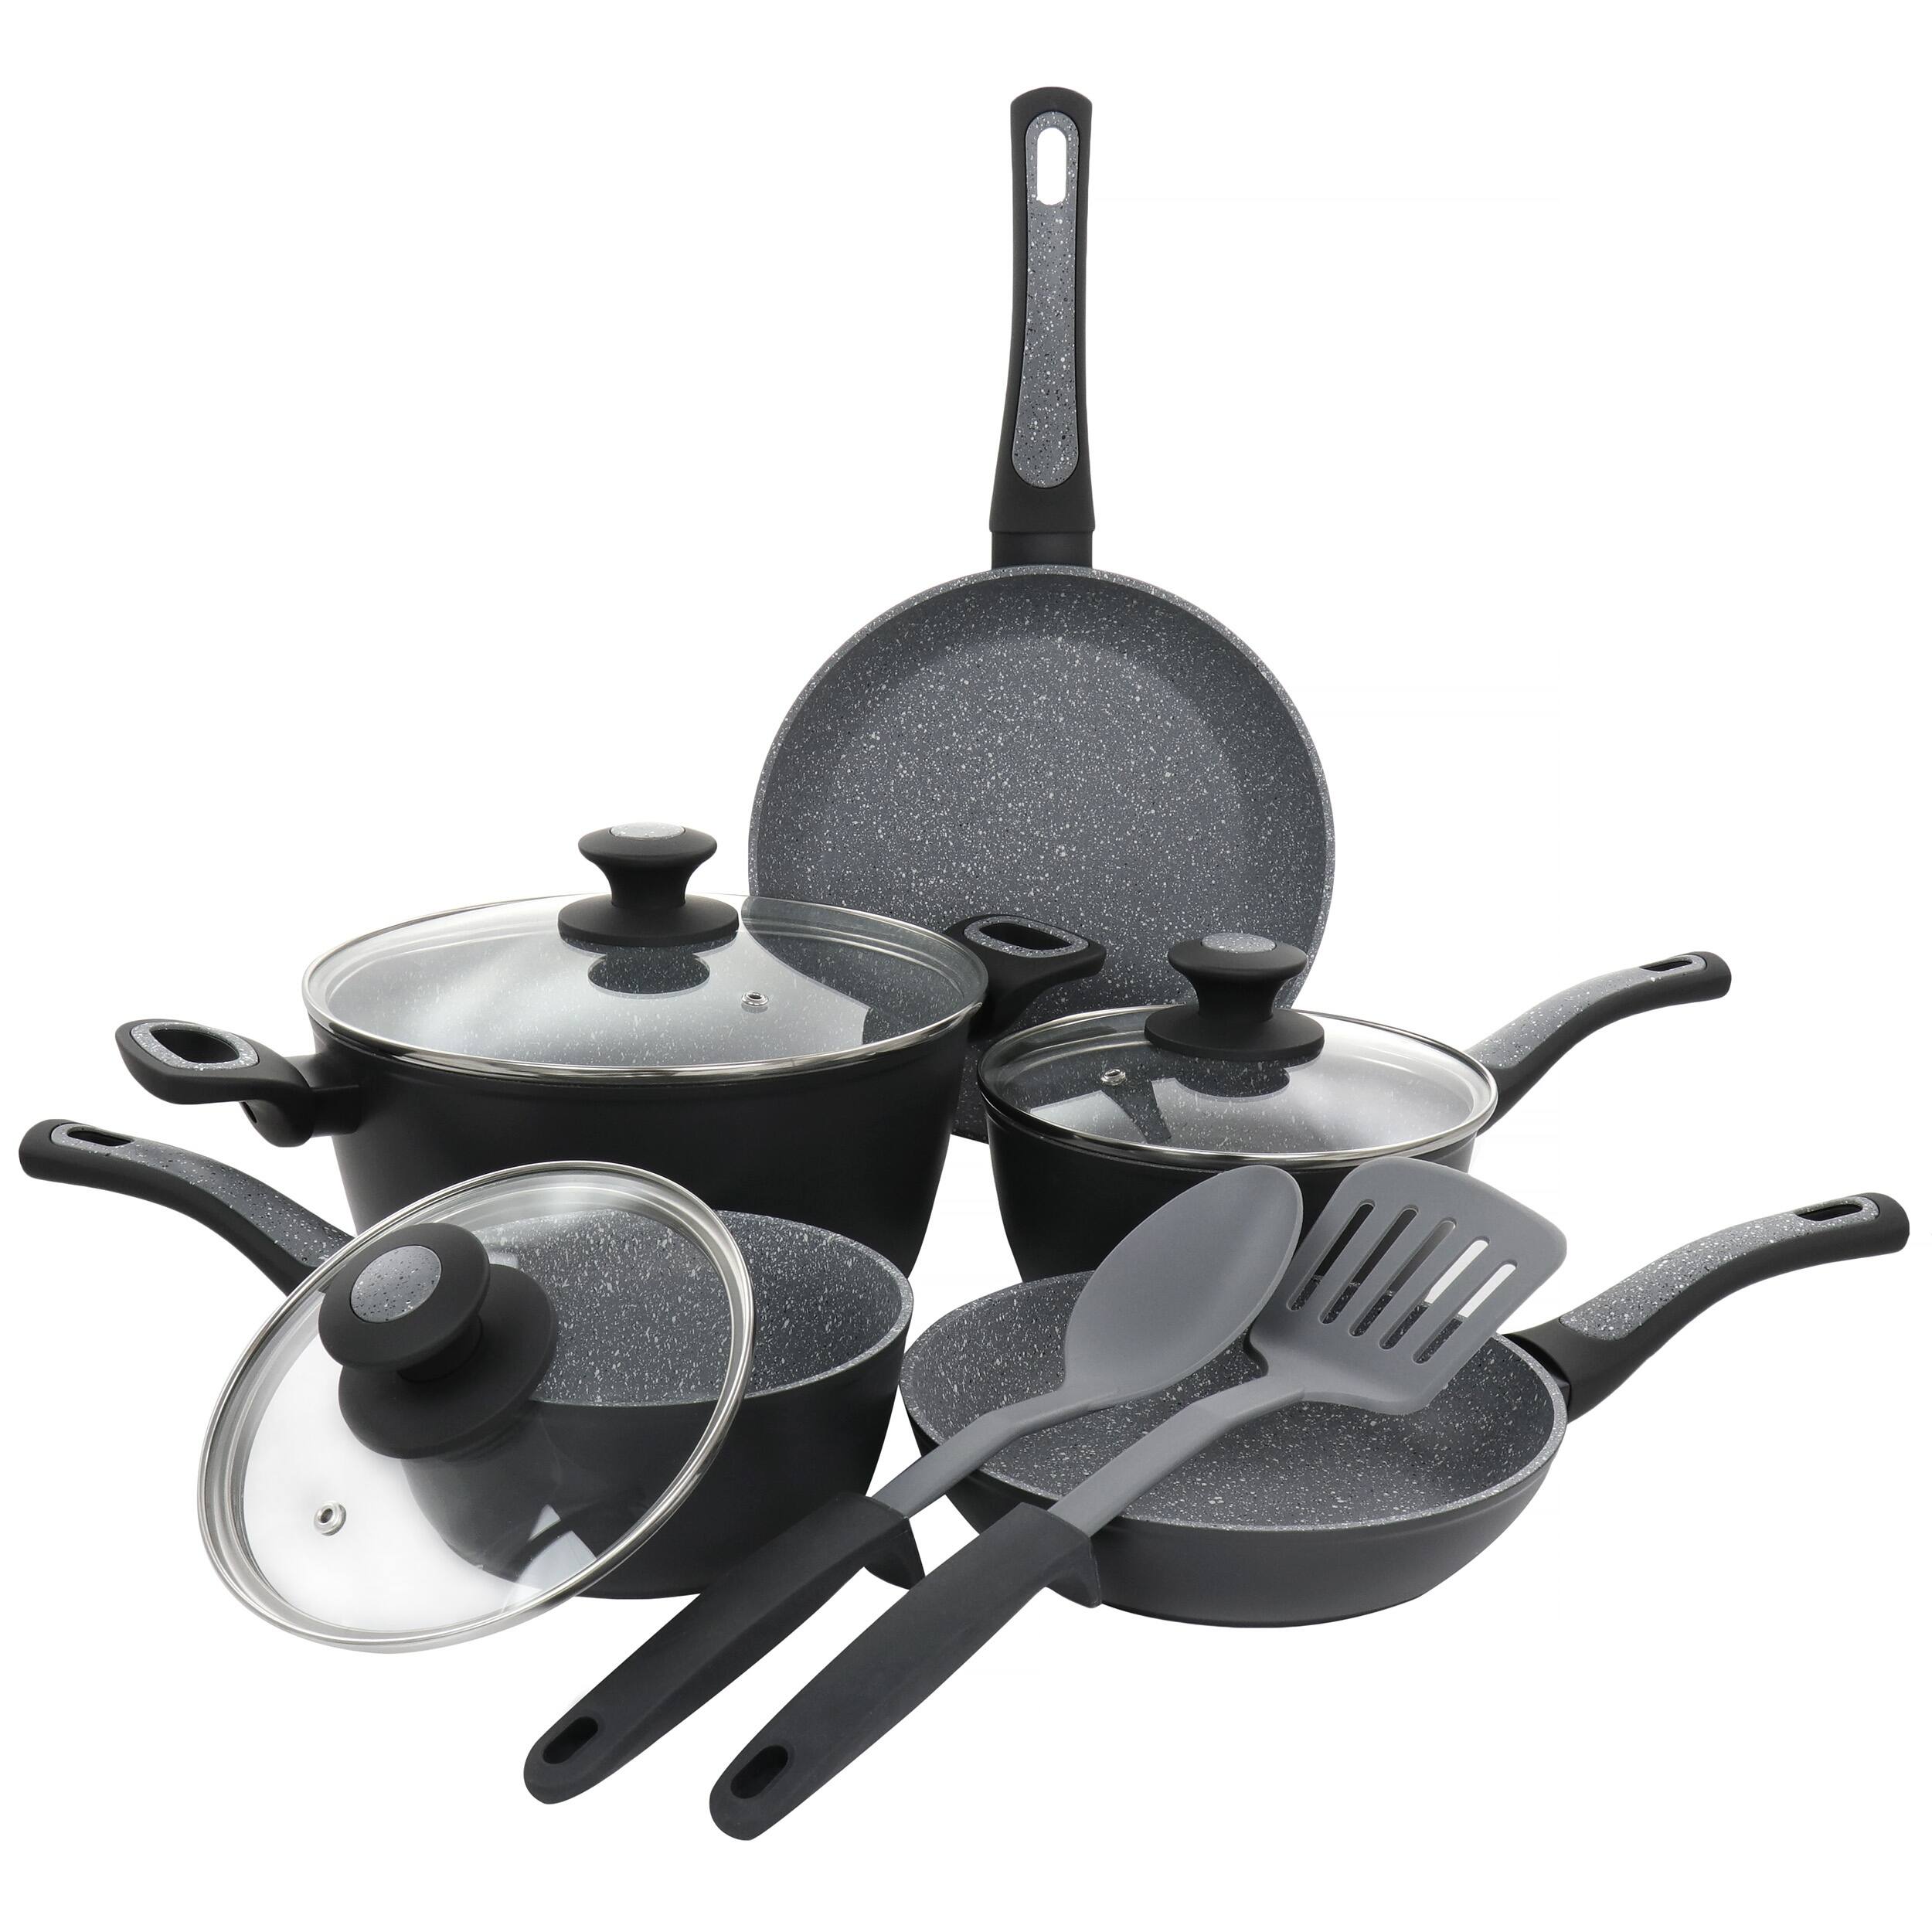 10 Piece Non-Stick Aluminum Cookware Set in Black and Grey Speckle